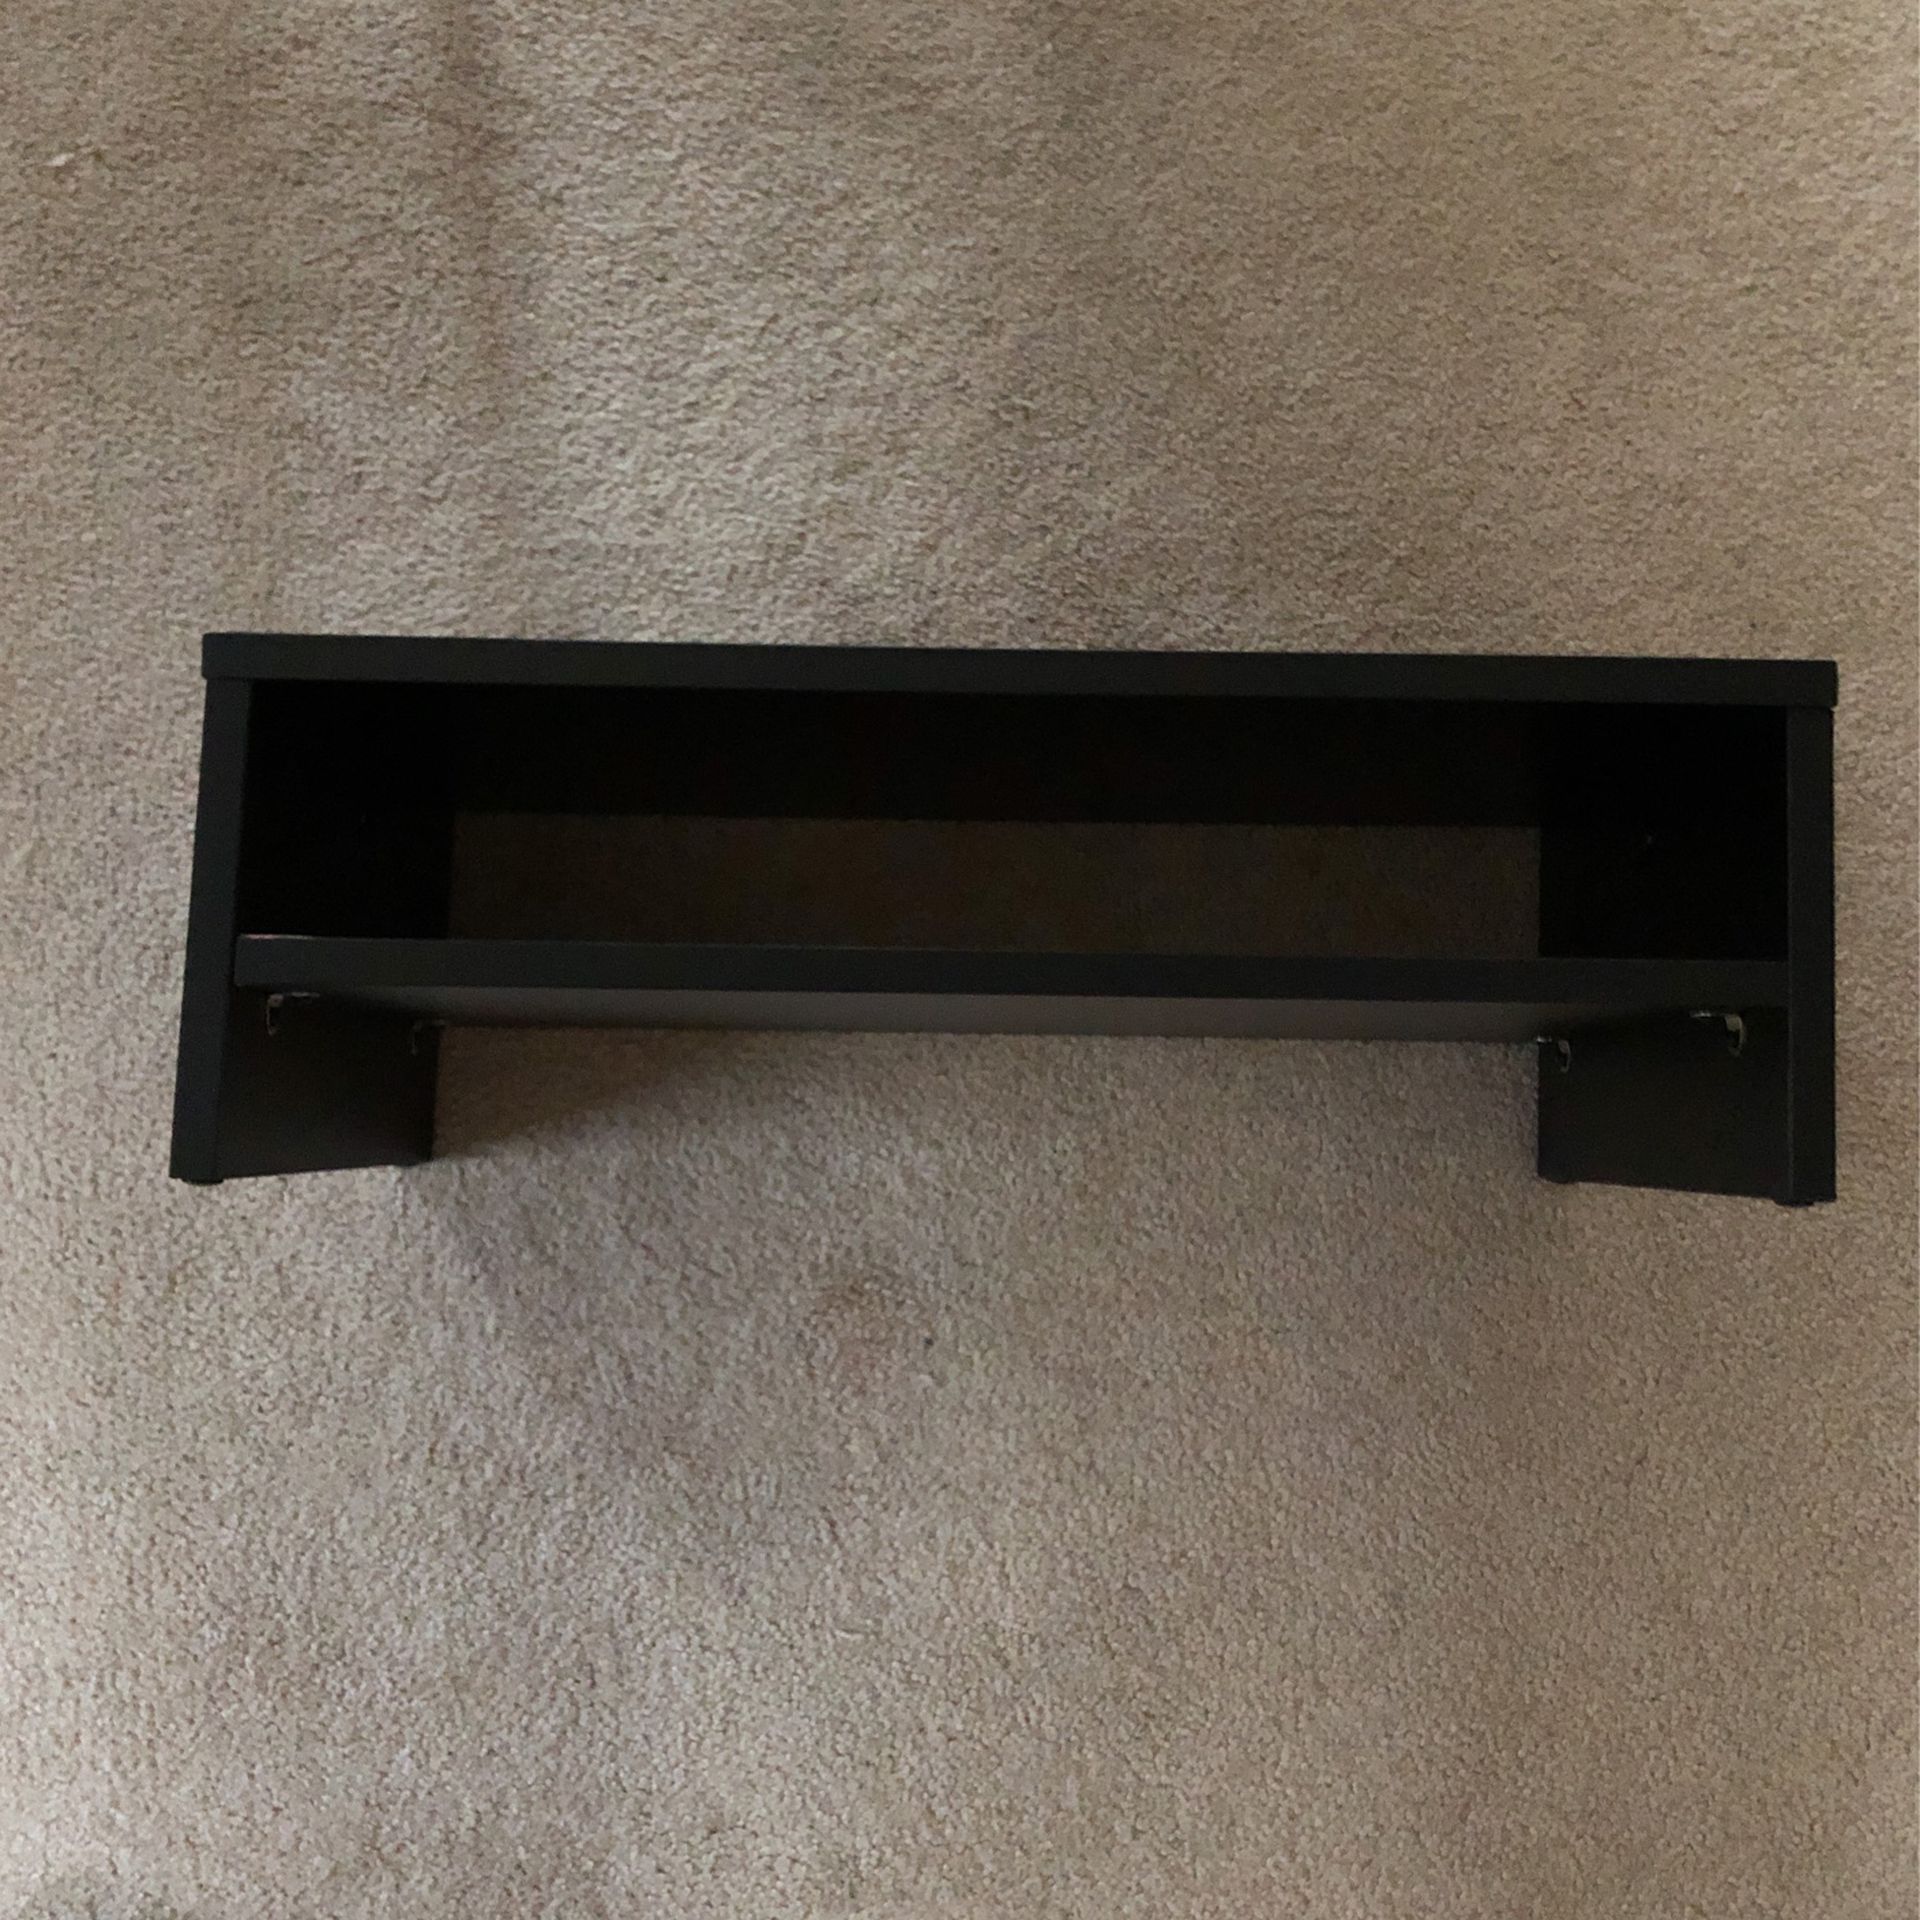 17x9 In Monitor Stand